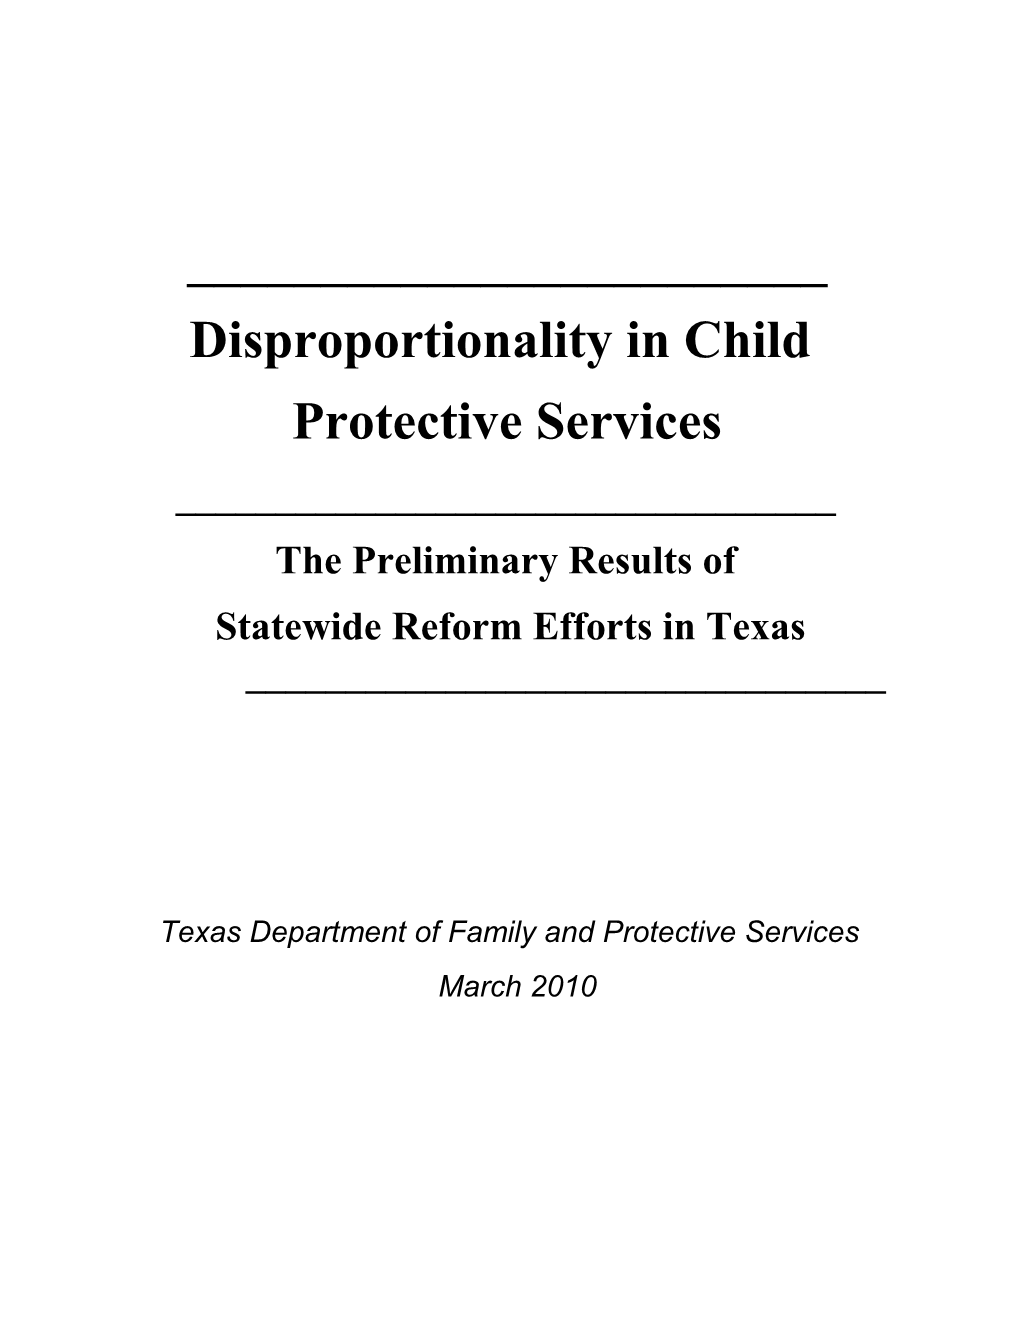 Disproportionality in Child Protective Services